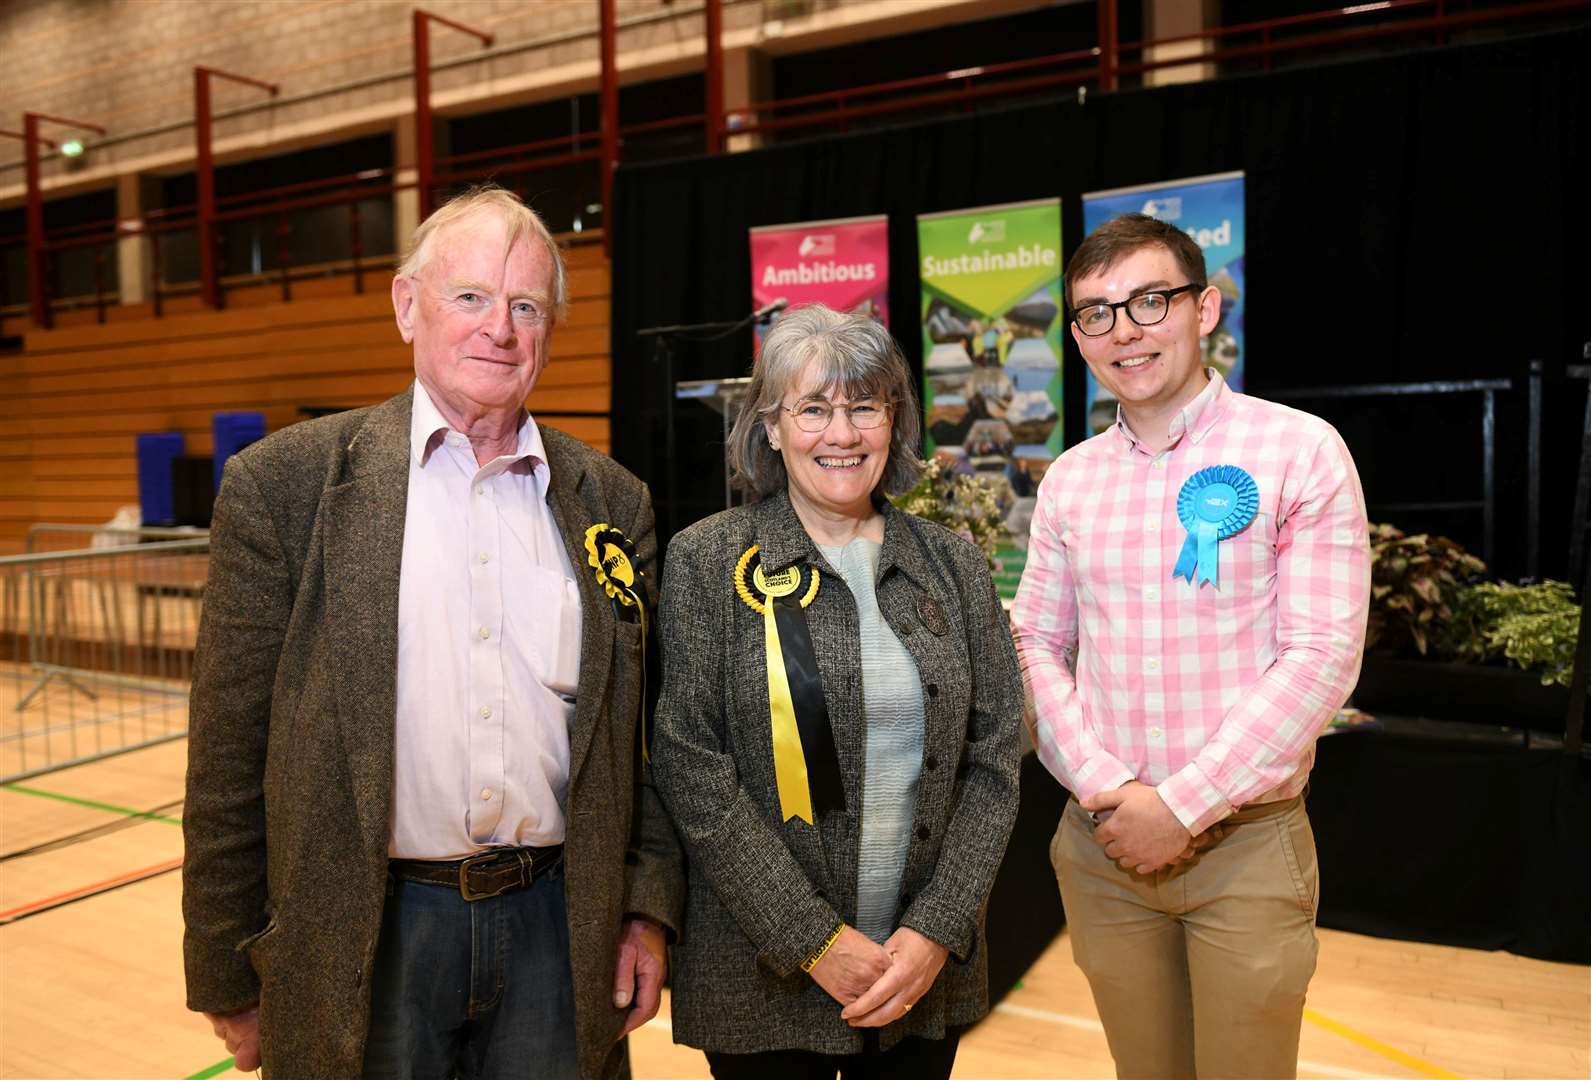 Councillors by Ward: 05 Wester Ross, Strathpeffer and Lochalsh: Chris Birt (Scottish National Party), Liz Kraft (Scottish National Party) and Patrick Logue (Scottish Conservative and Unionist). Picture: Callum Mackay